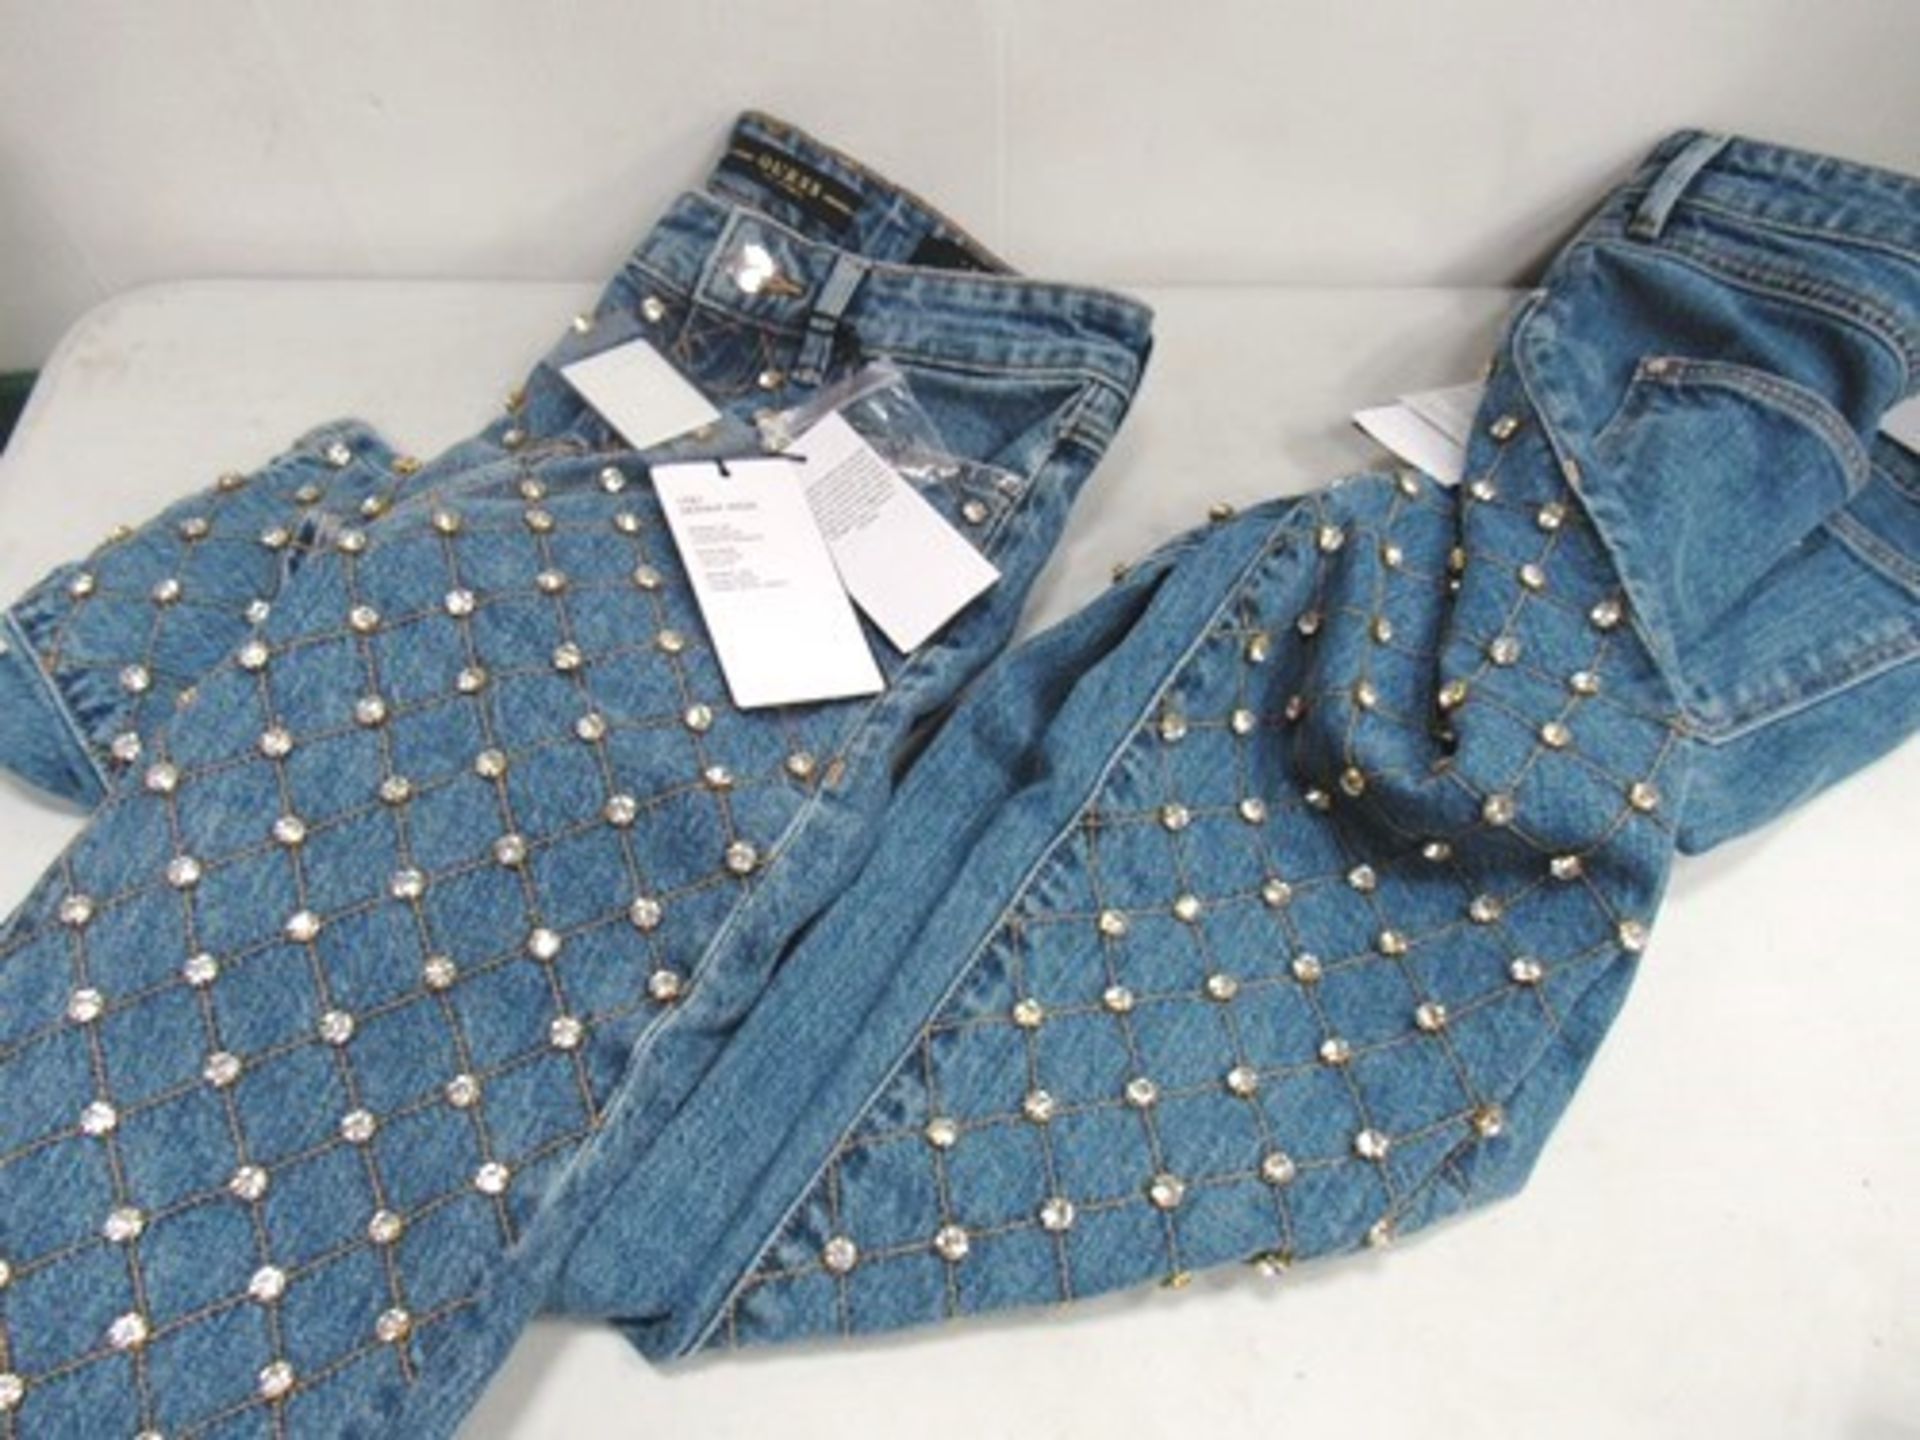 2 x pairs Guess skinny high rise jeans, crystal studded, 1 x pair size 27W and 1 x pairs size 28W,